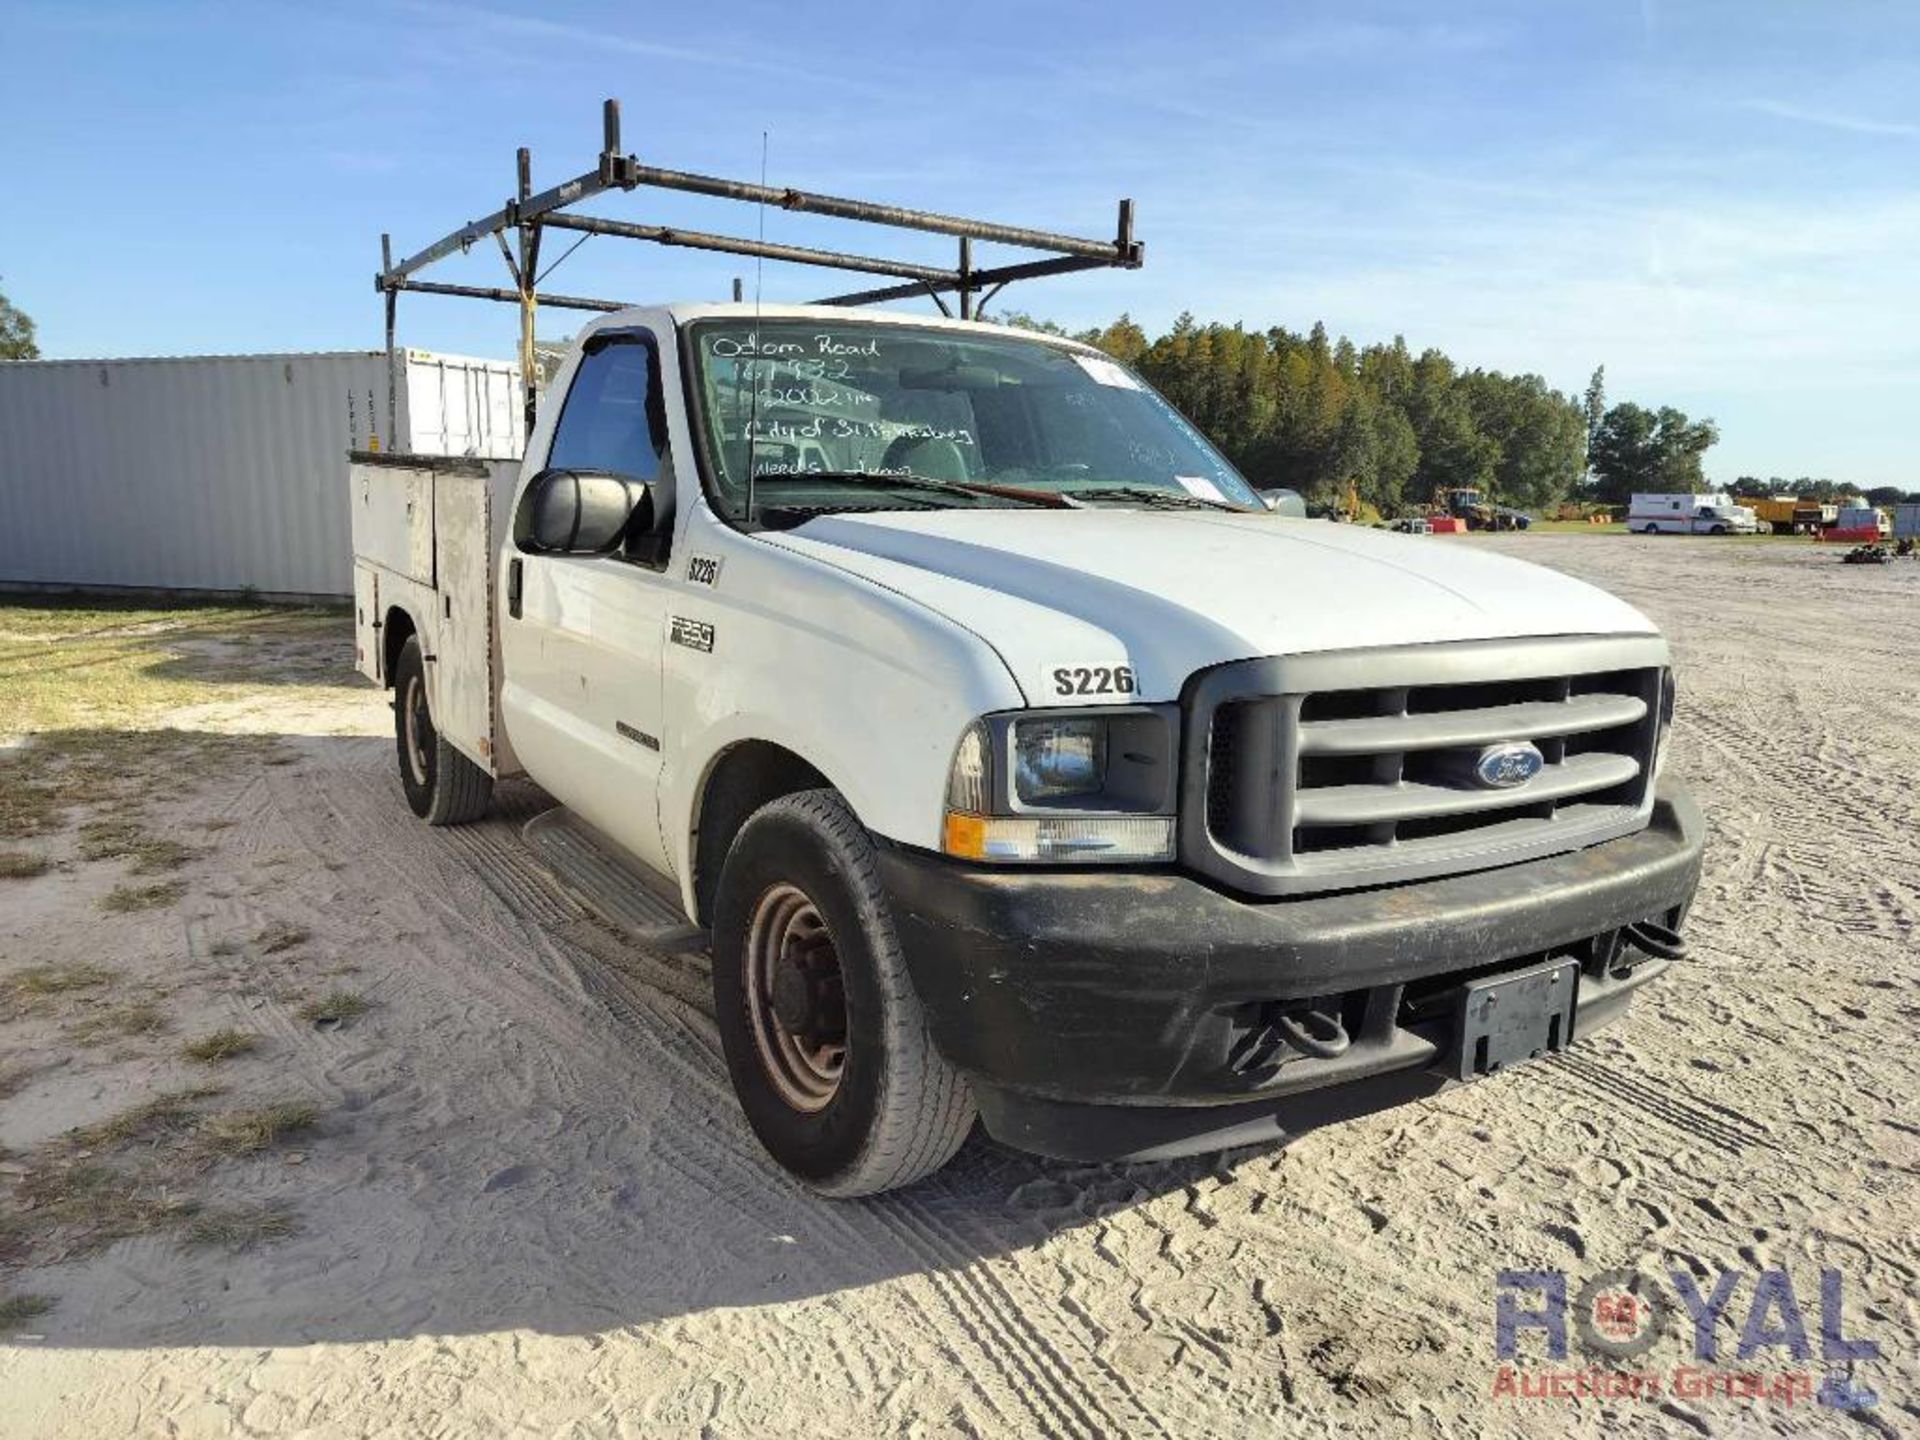 2002 Ford F250 Pickup Truck - Image 2 of 23